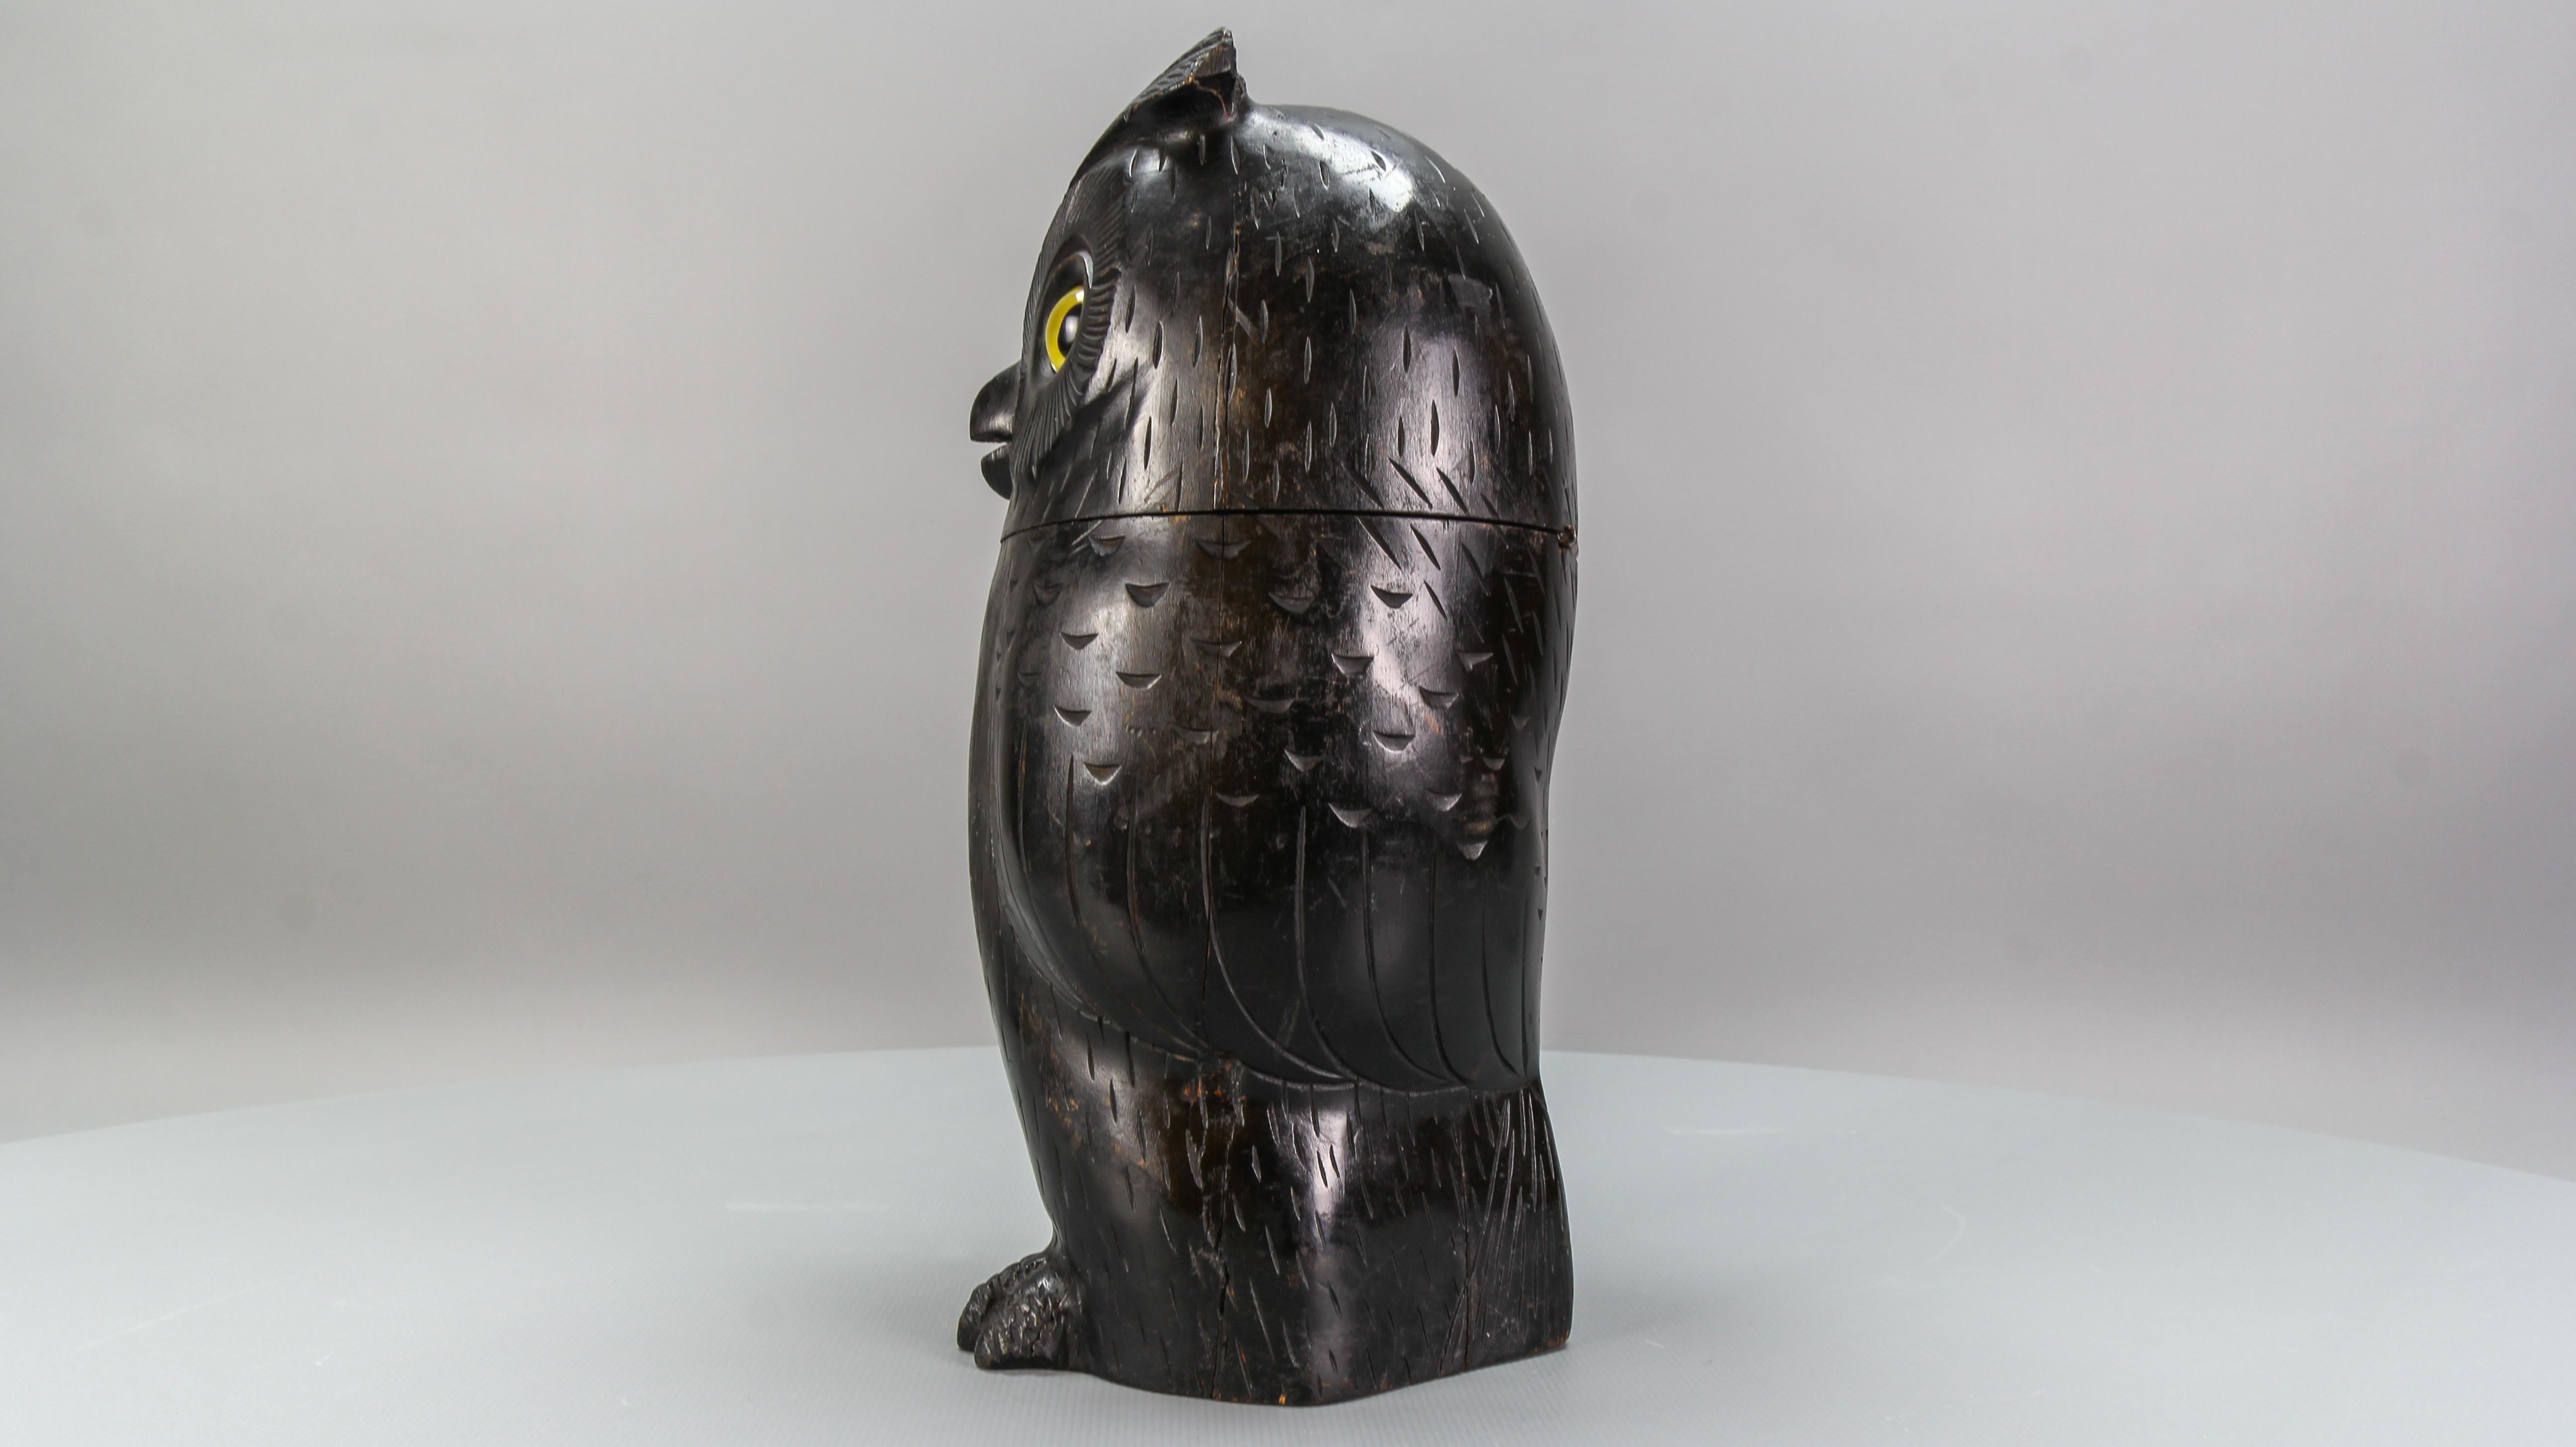 Oak Antique Black Forest Style Wooden Carved Trinket Box or Bucket Owl, circa 1920 For Sale